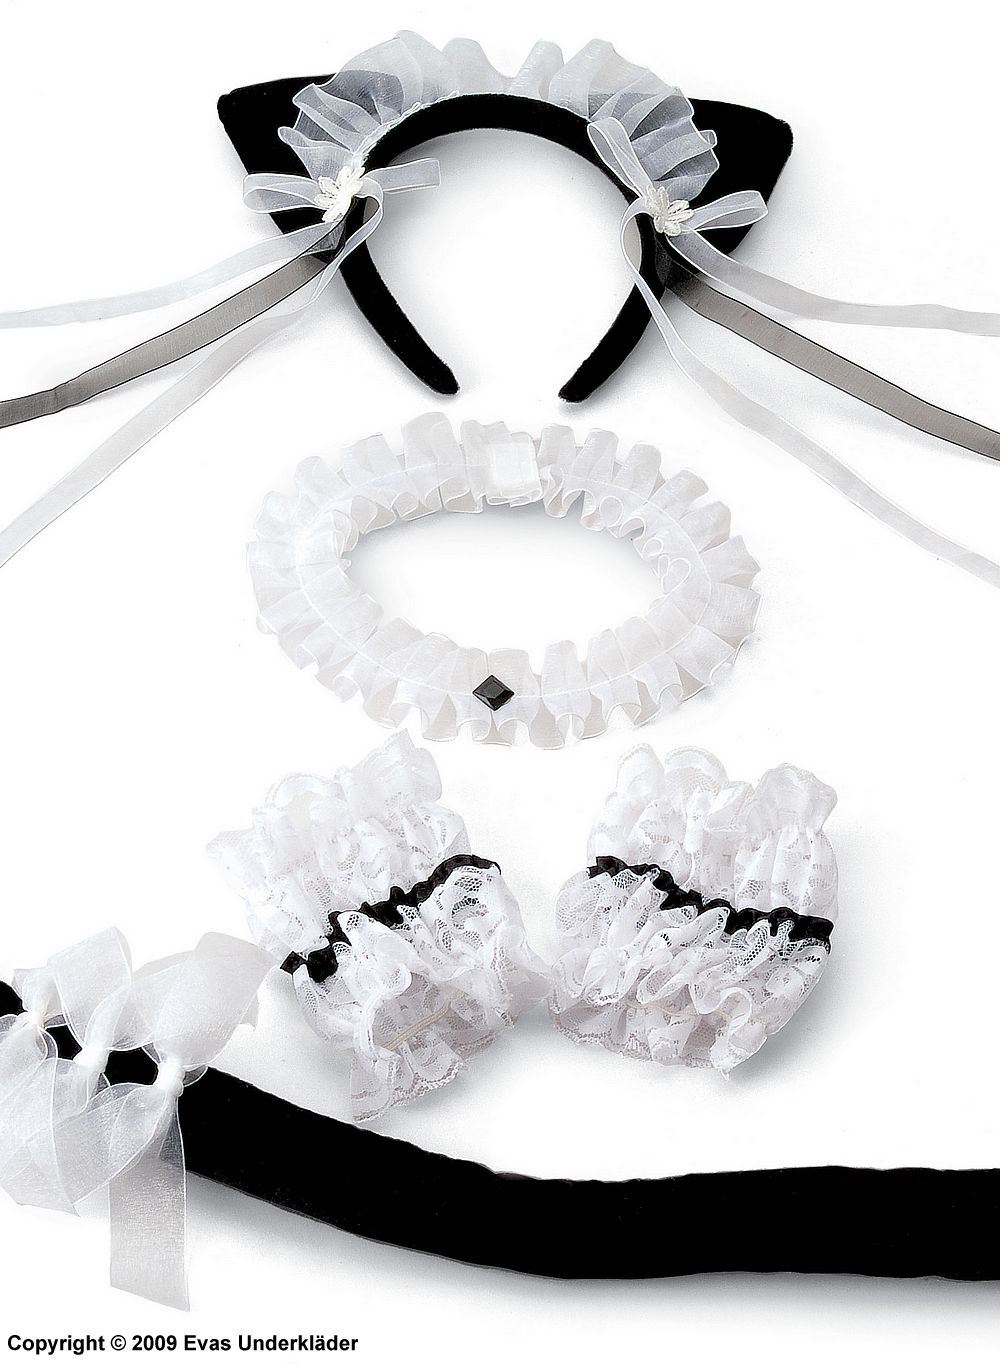 Accessory set for sexy cat